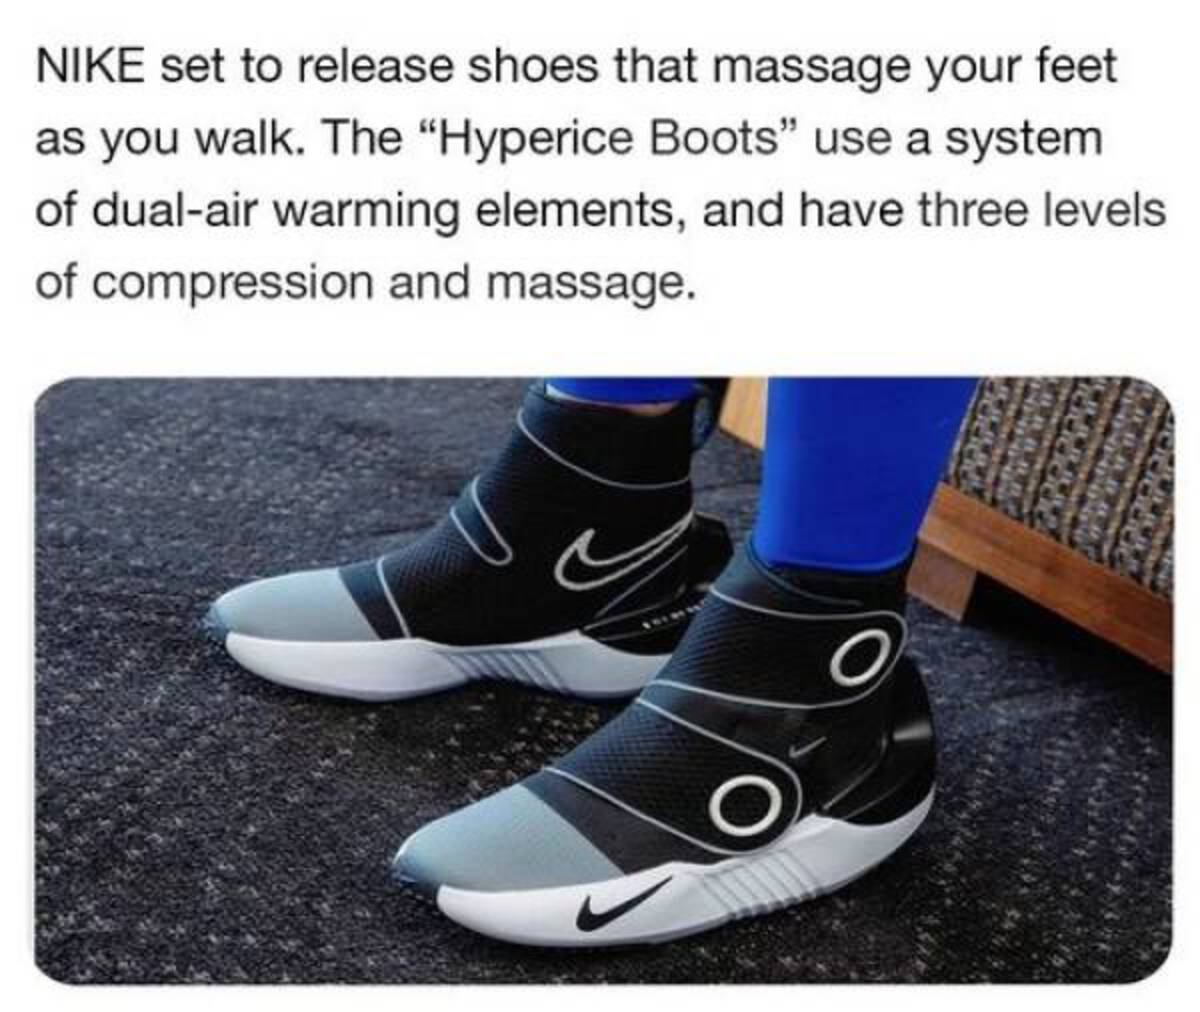 nike hyperice - Nike set to release shoes that massage your feet as you walk. The "Hyperice Boots" use a system of dualair warming elements, and have three levels of compression and massage.